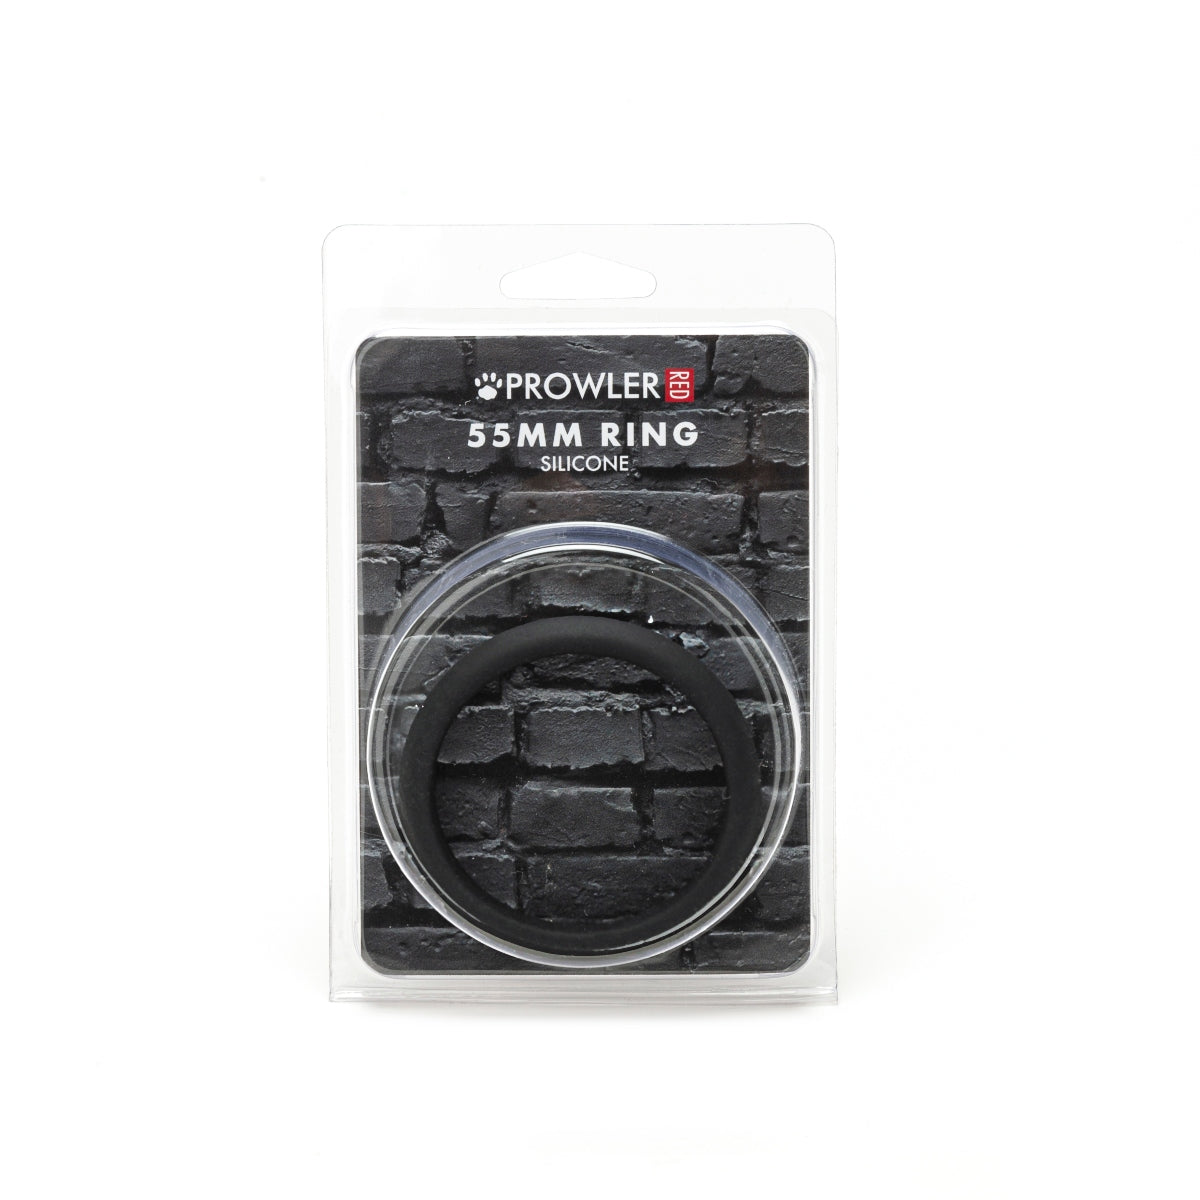 Prowler RED Silicone Cock Ring 55mm